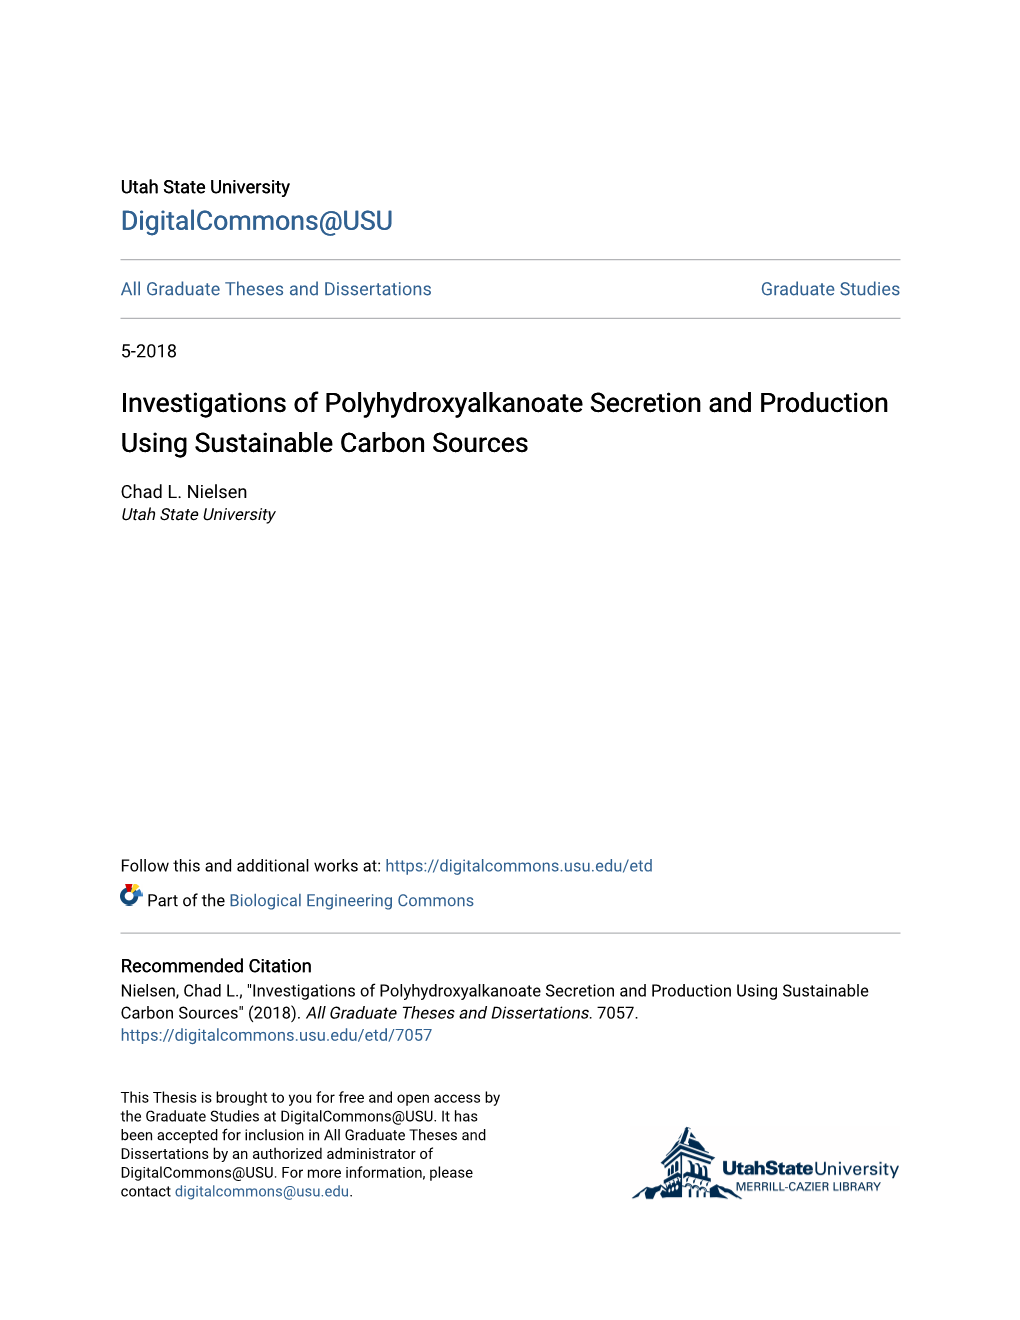 Investigations of Polyhydroxyalkanoate Secretion and Production Using Sustainable Carbon Sources